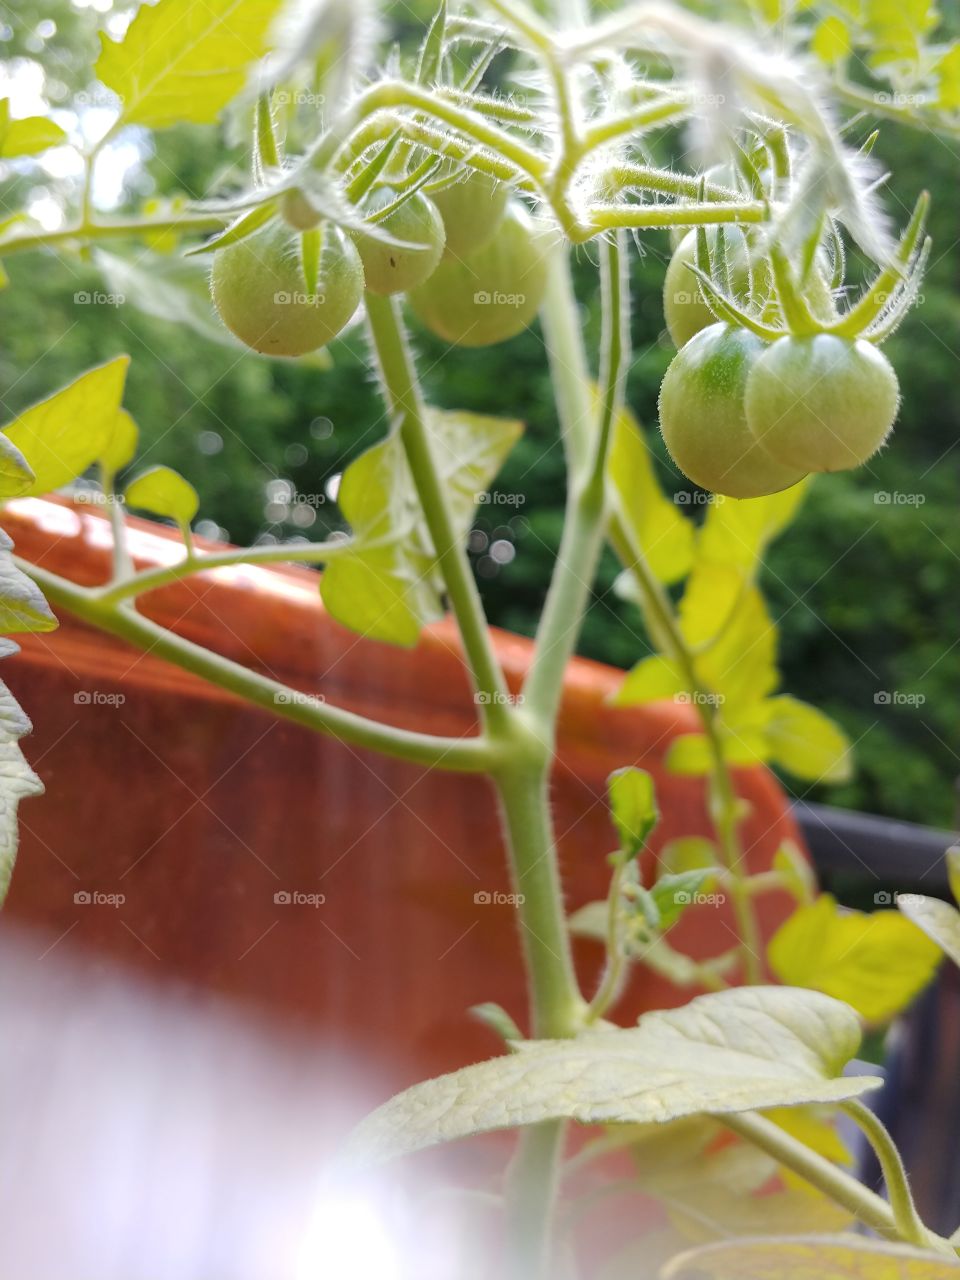 here is a different angle of the same tomato branch. i cant wait to try some in a nice salad.